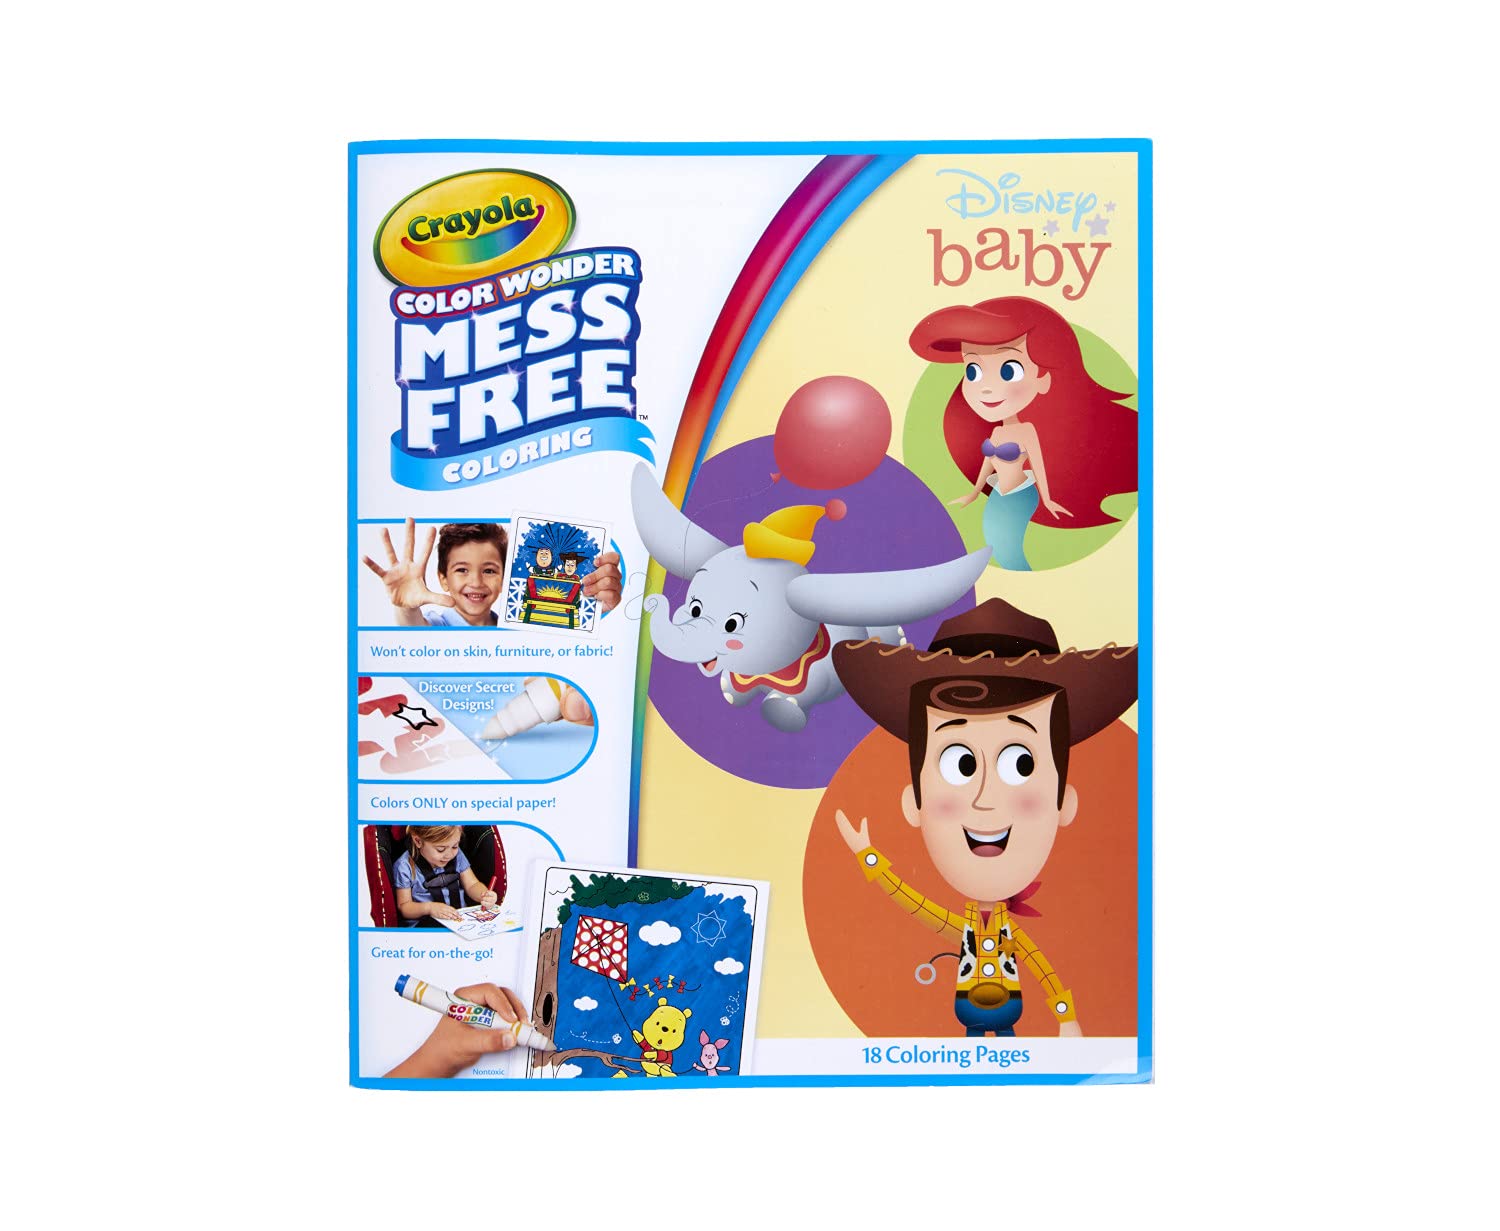 Crayola Color Wonder Disney Baby Characters, Mess Free Coloring Pages, Gift for Kids, Age 3, 4, 5, 6